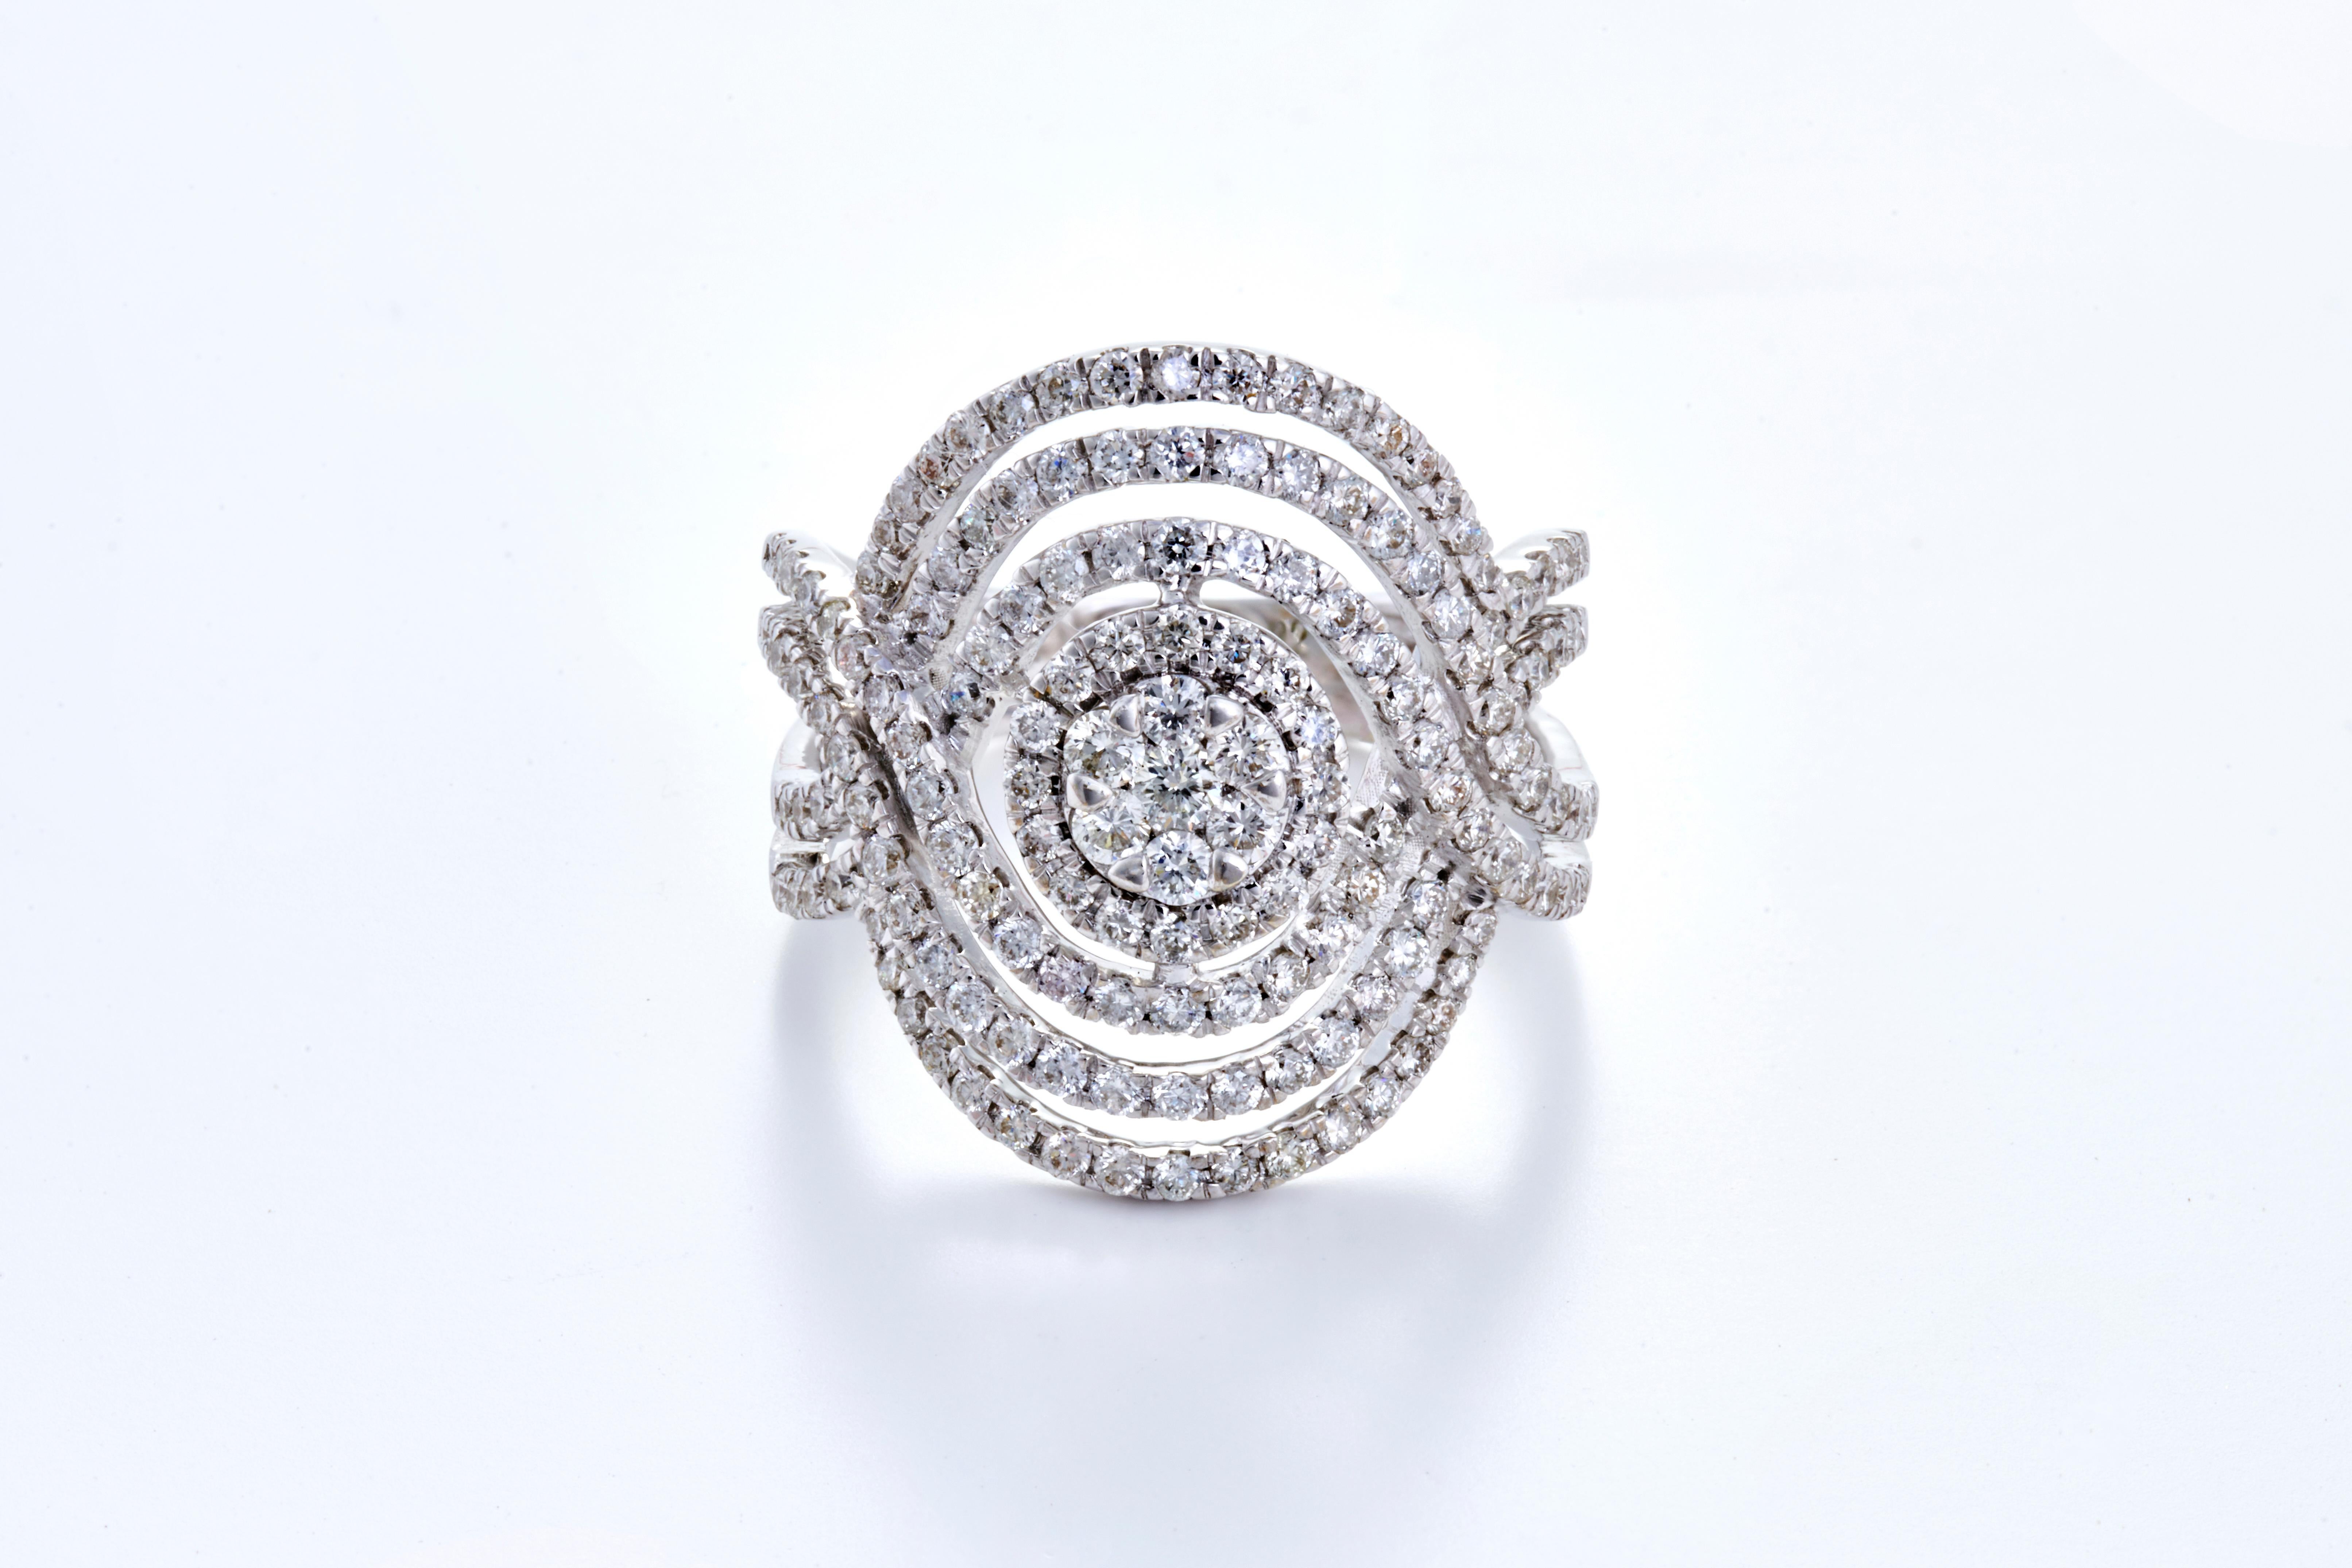 A statement ring of sheer beauty and grace meant for royalty.  Studded with 157 pieces of VS quality and G colour weighing 1.22 carats in 6.91 grams of 18K White Gold. 

These diamonds have been carefully picked and selected from authentic sources